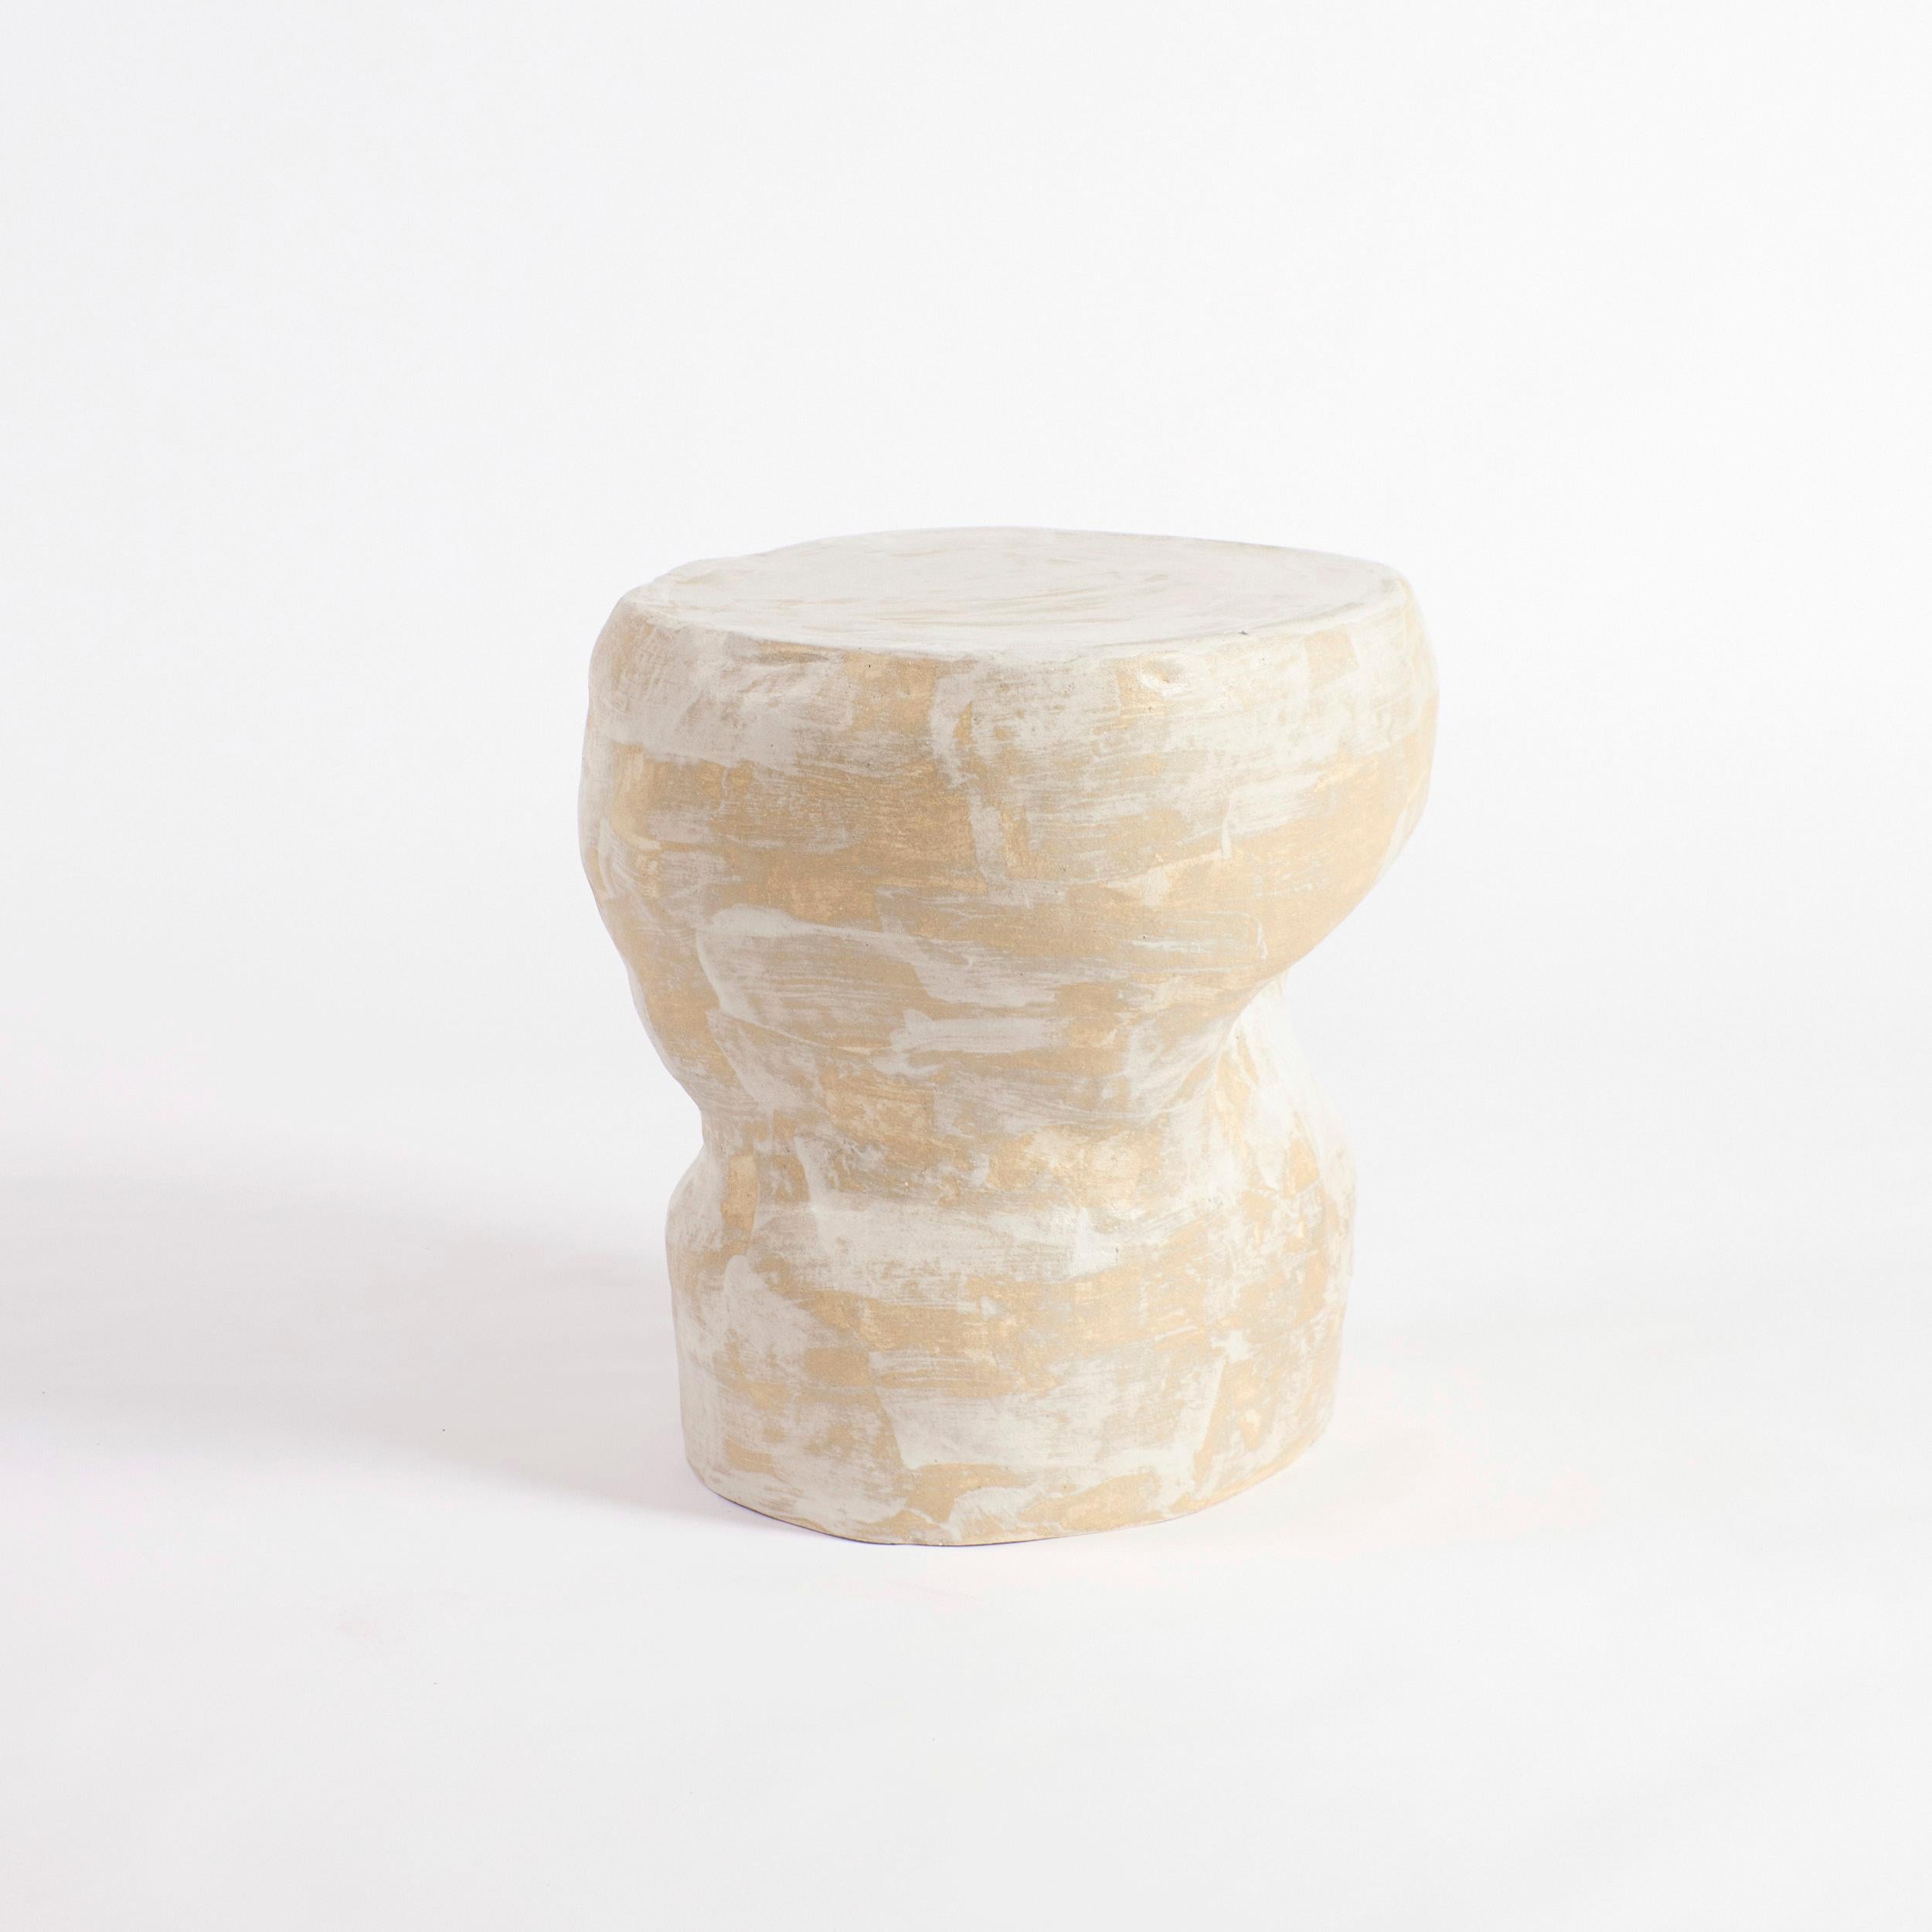 Artisanal Ceramic Side Table in translucent cream white by Project 213A.
Crafted in the brand's in-house ceramic workshop.

This table follows a general design pattern launched in 2023 but due to the hand-crafted and hand-glazed process creating